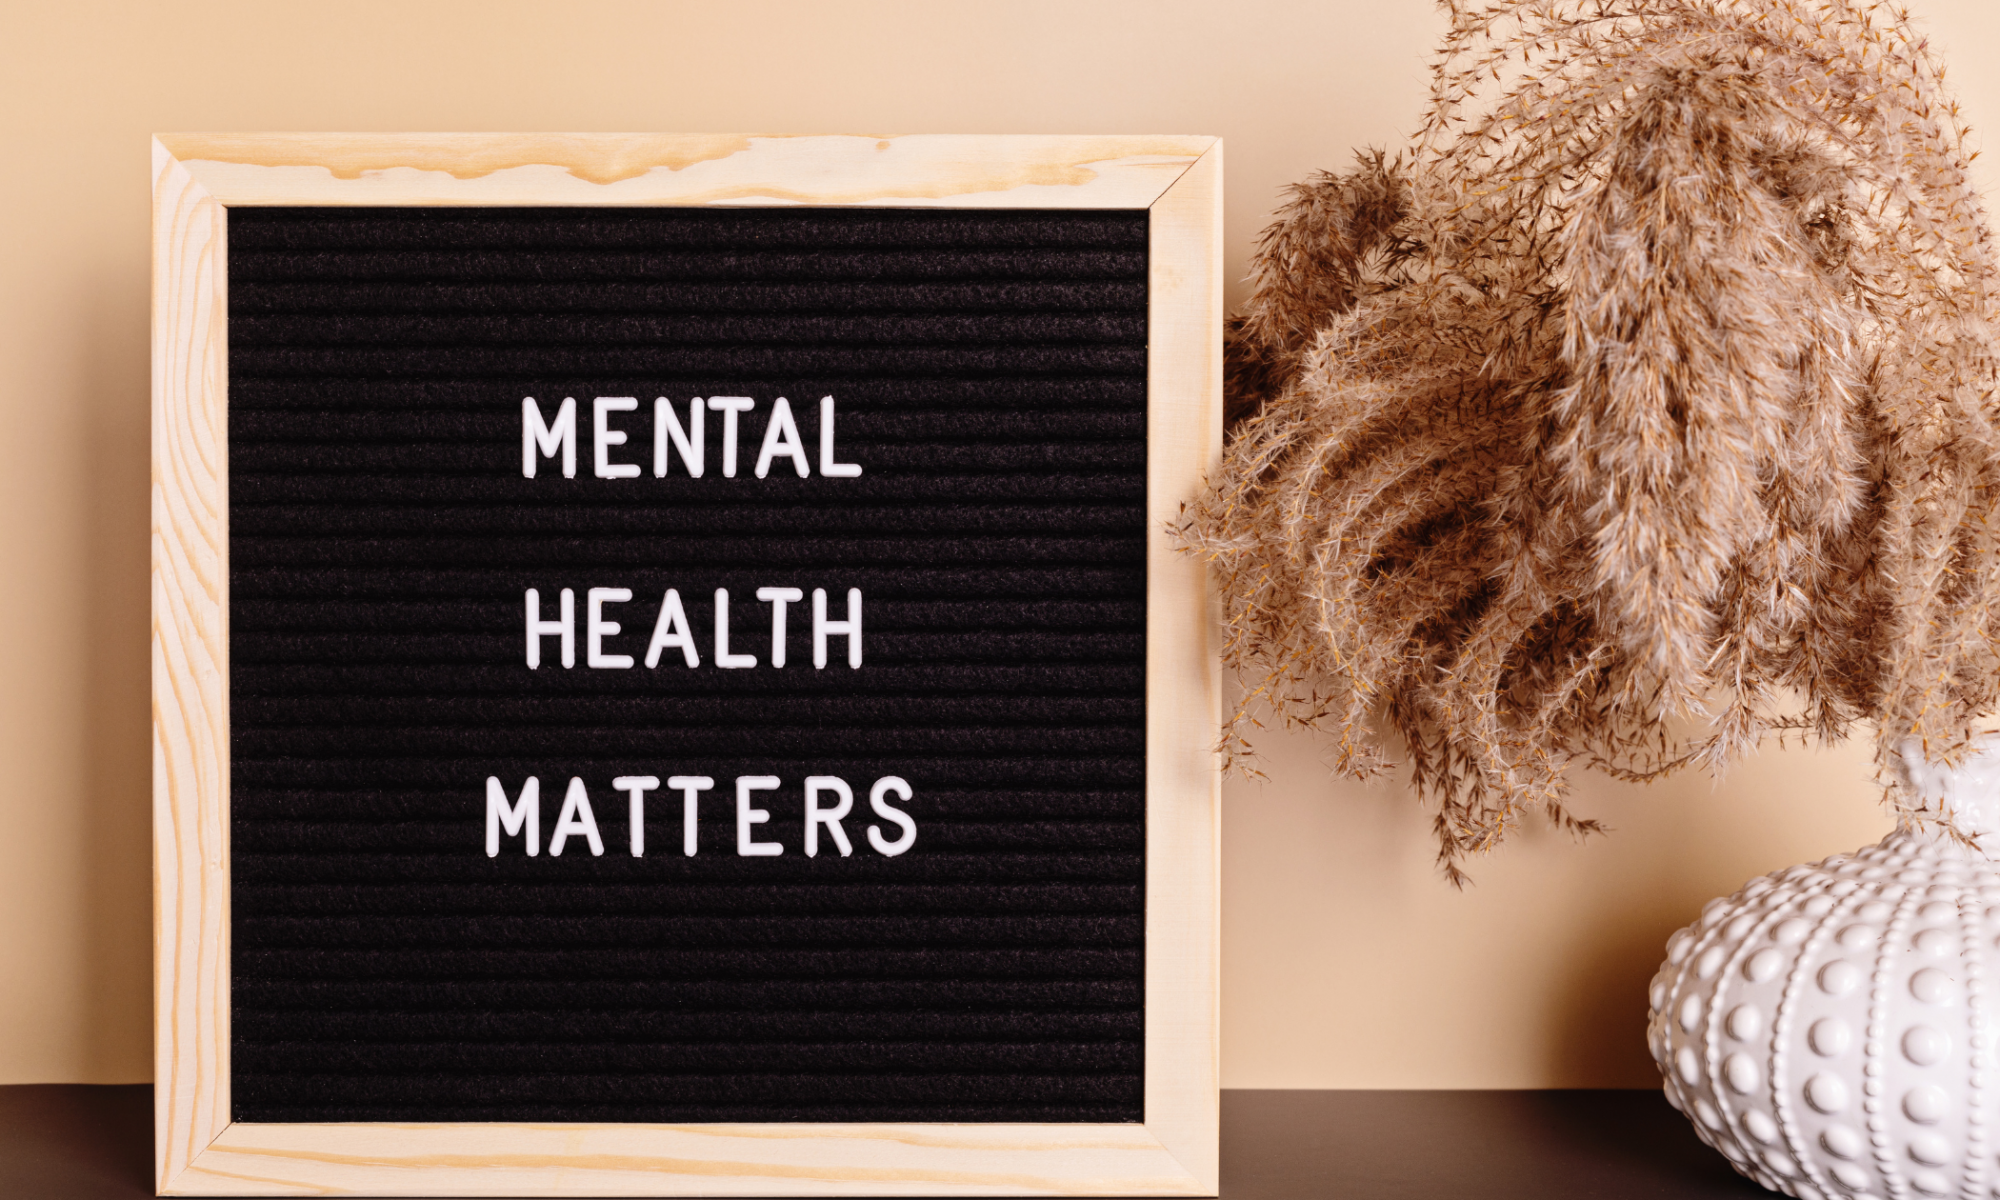 Letter board with words "Mental Health Matters"